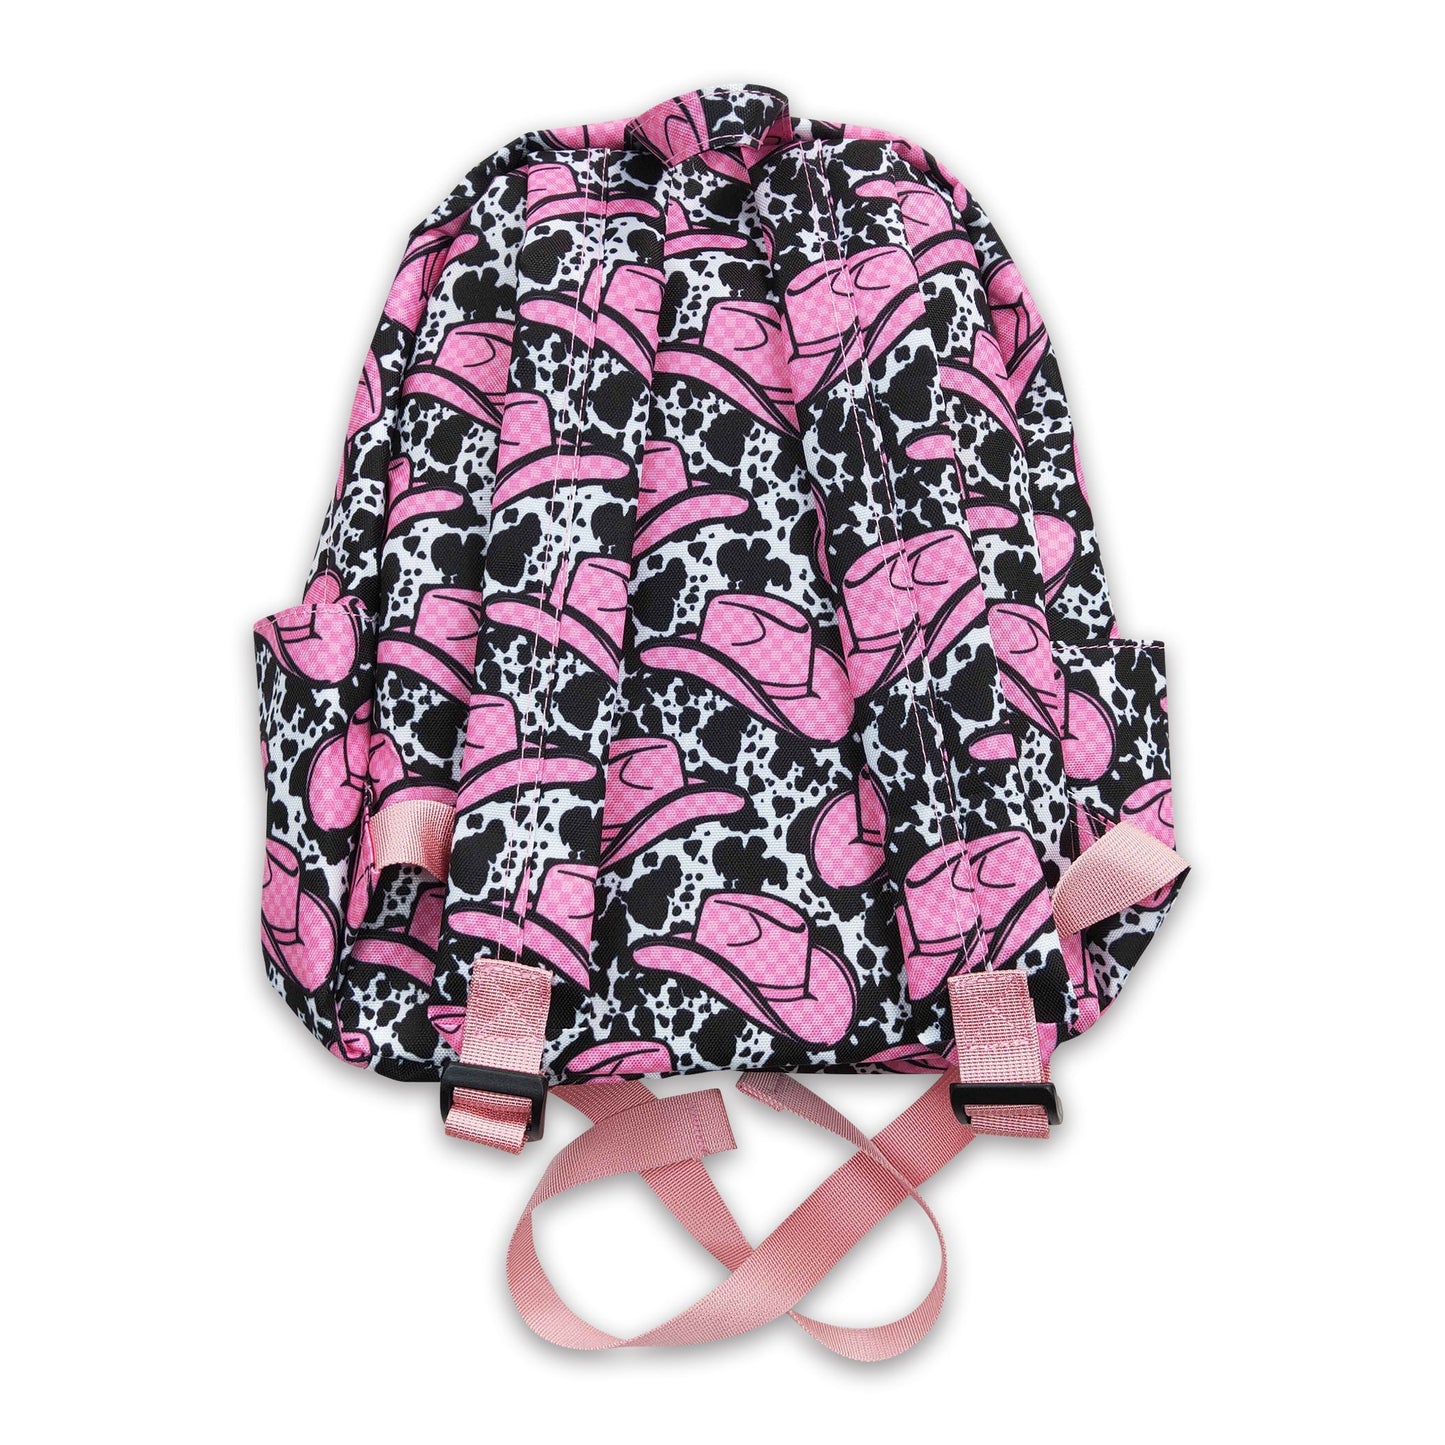 Cow hats western backpack kids girls back to school bags